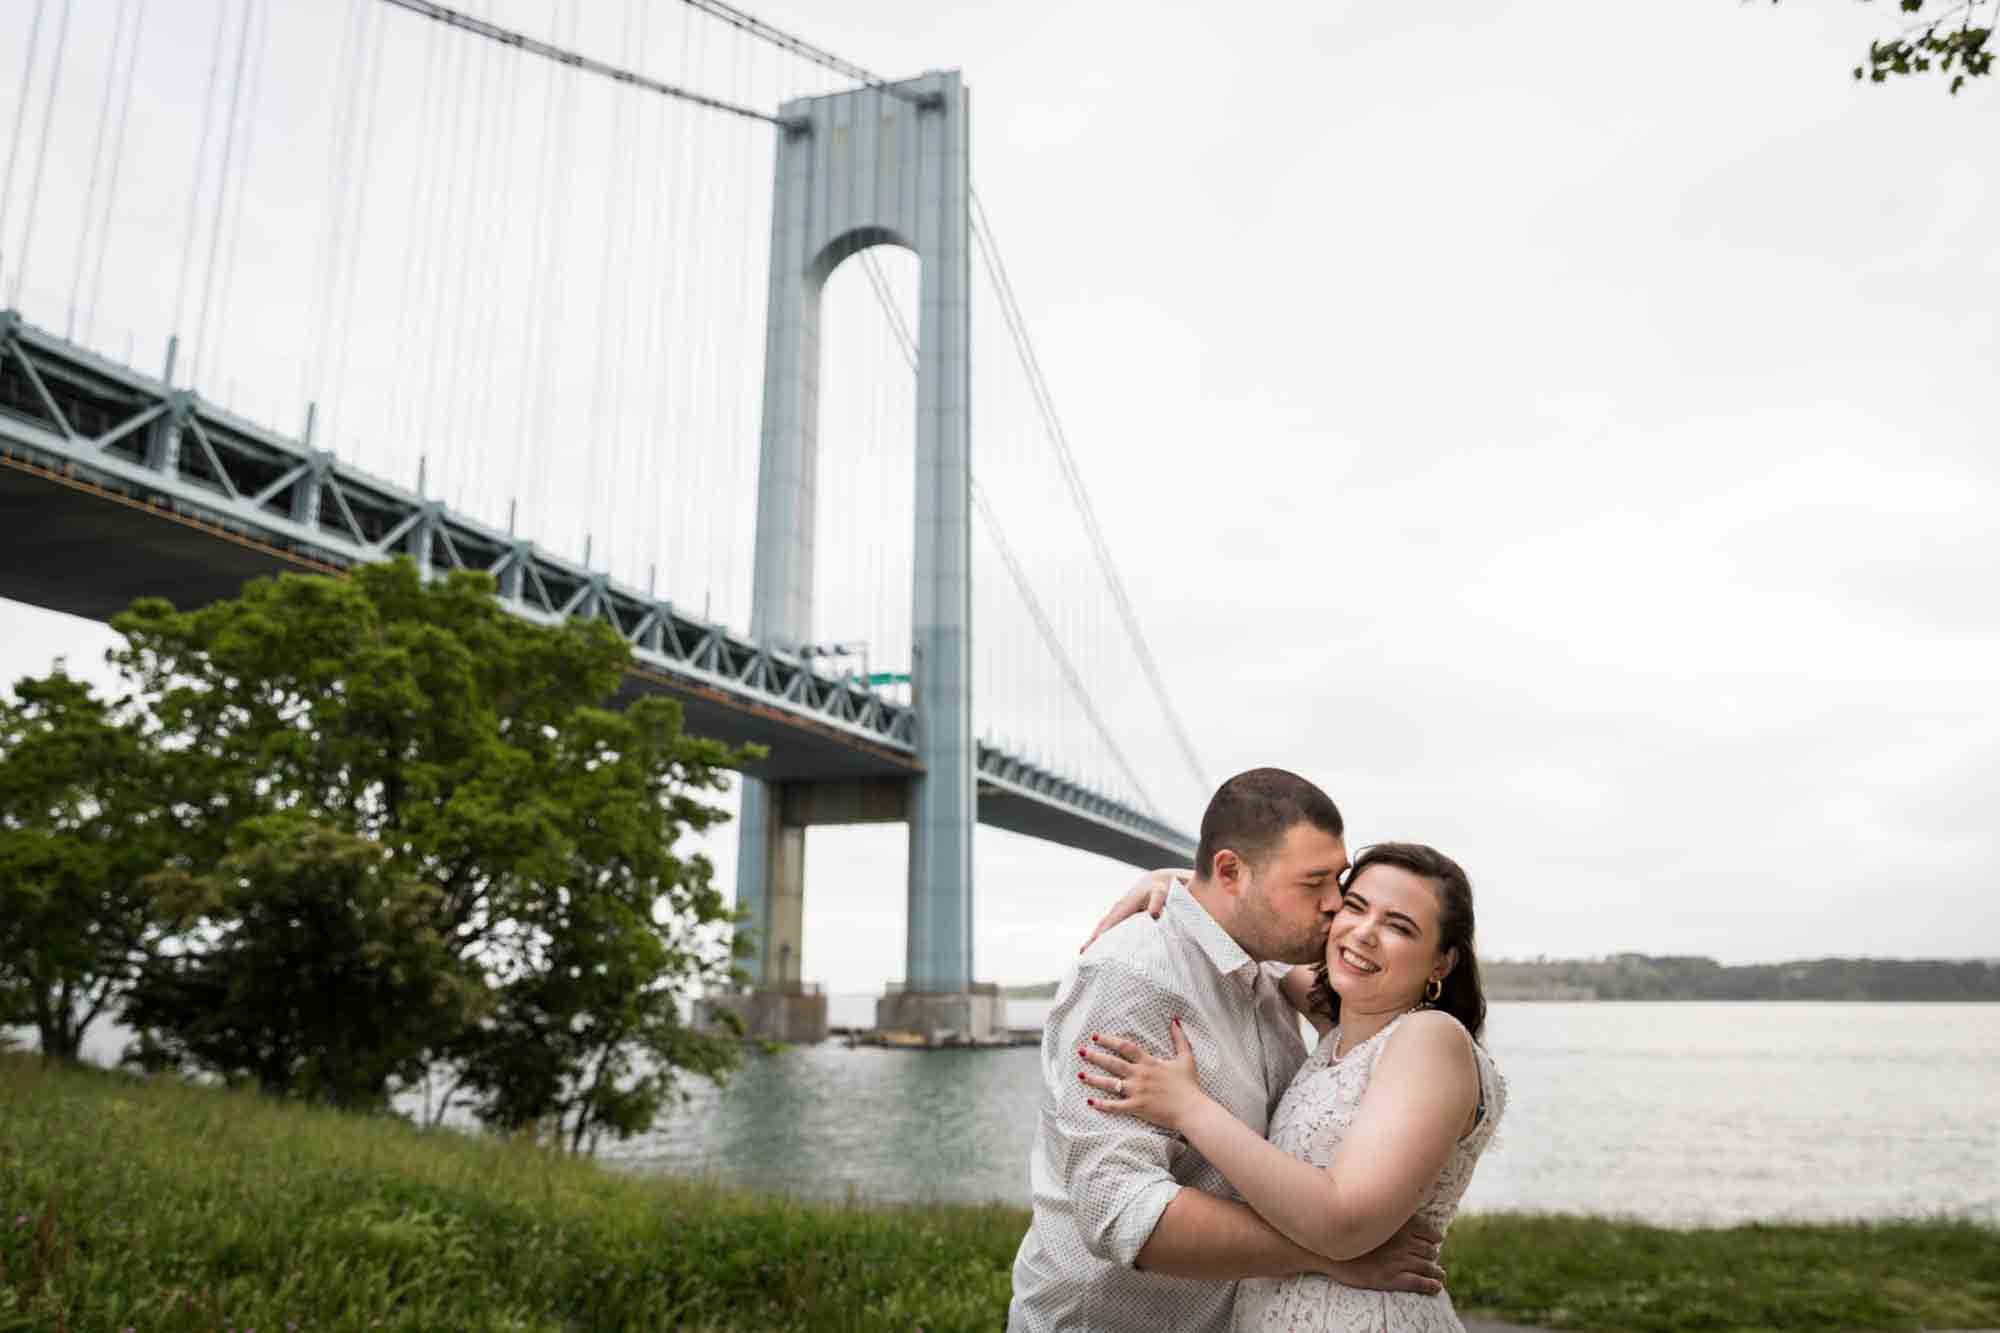 Man kissing woman on the cheek in front of Verrazano Bridge for an article on how to recreate your love story in your engagement shoot